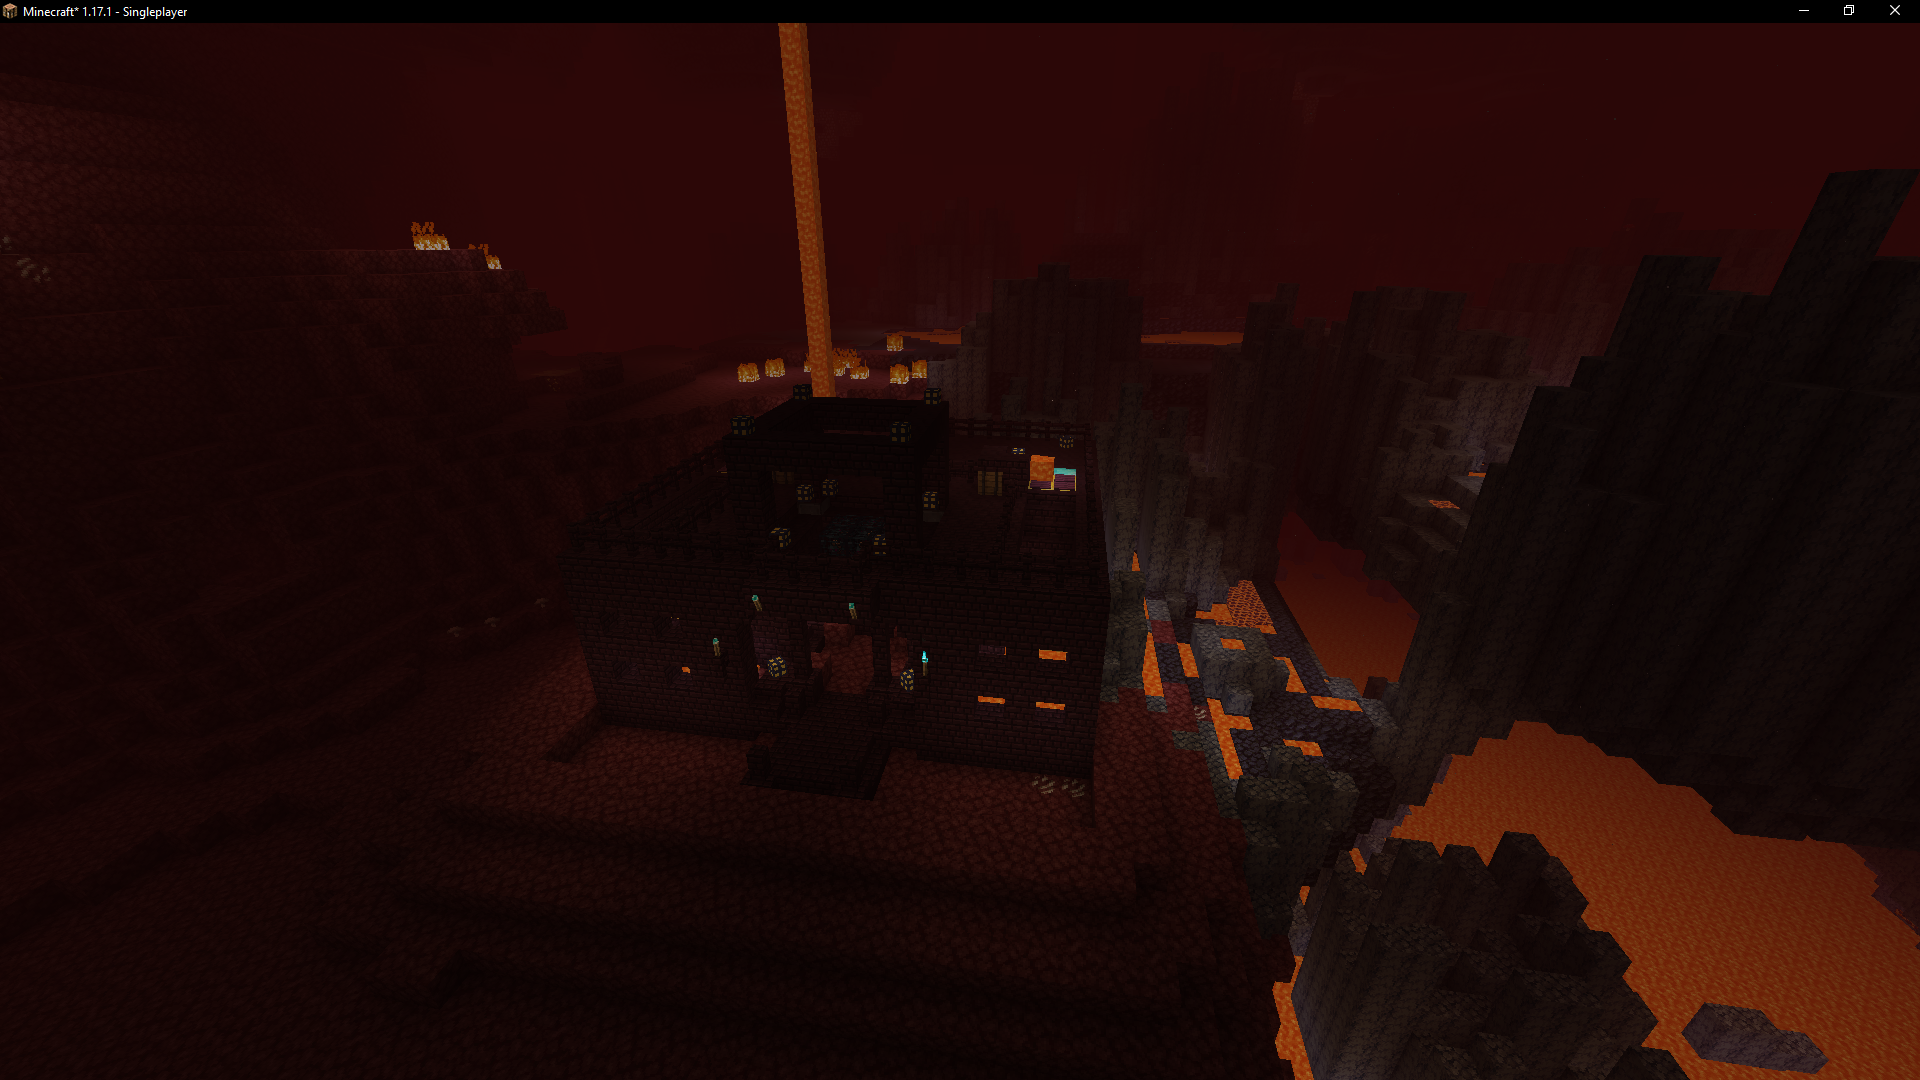 Awesome Dungeon Nether edition screenshot 1